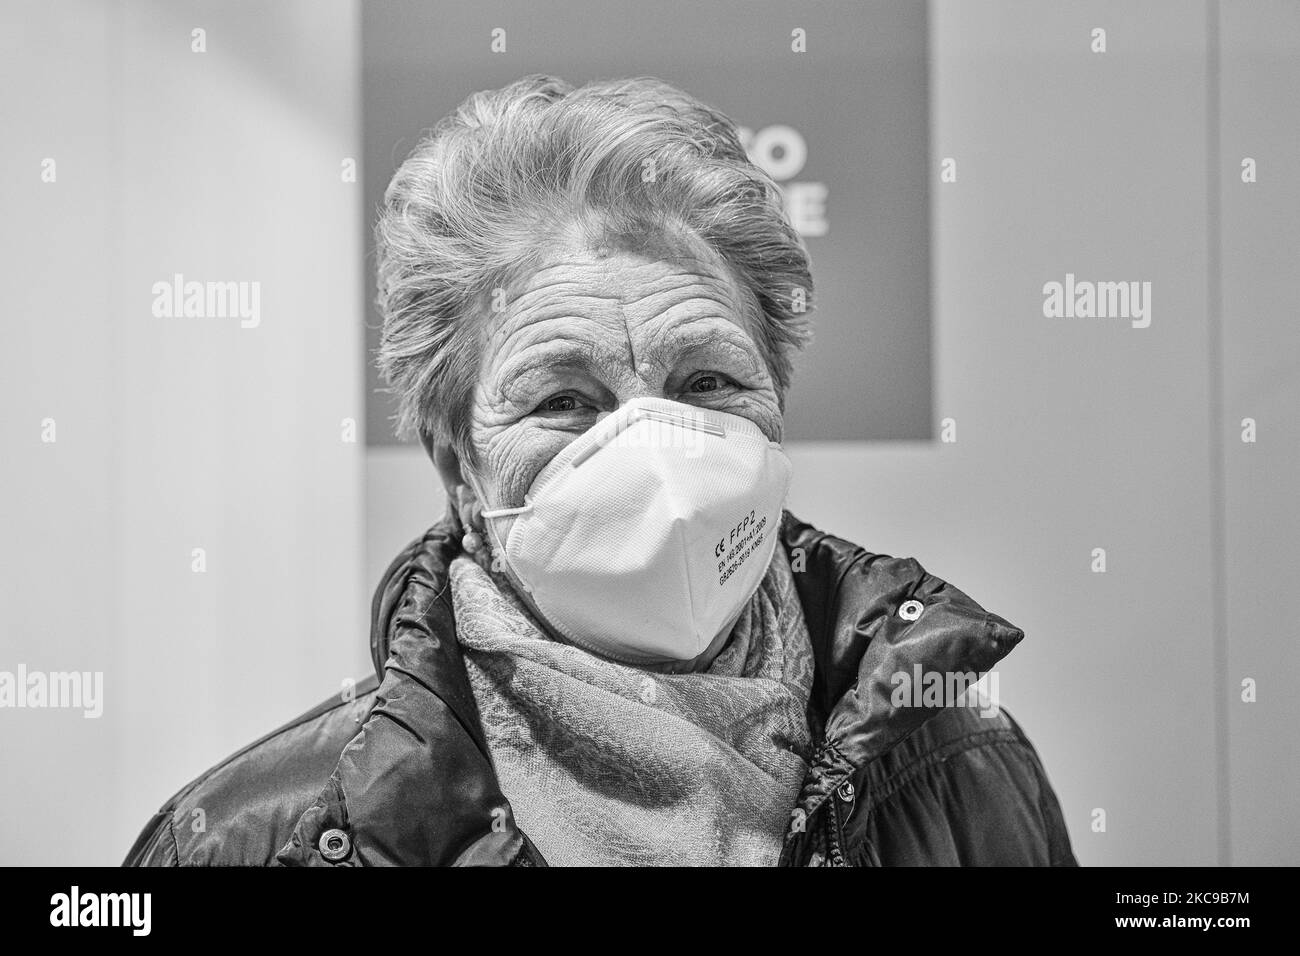 (EDITOR'S NOTE: Image was converted to black and white) In the picture Mrs. Luciana Esti is the first elderly woman over 80 from Padua to receive the first dose of the vaccine against Covid19 produced by Pfizer-Biontech. Wear a protective mask. The municipality of Padua has set up a point for vaccination against Covid19 (Coronavirus) with the vaccine produced by Pfizer-BioNTech inside the pavilions of the exhibition complex in Via Tommaseo. The vaccination campaign for the elderly Over 80 starts today. On February 15, 2021, in Padua, Italy (Photo by Roberto Silvino/NurPhoto) Stock Photo